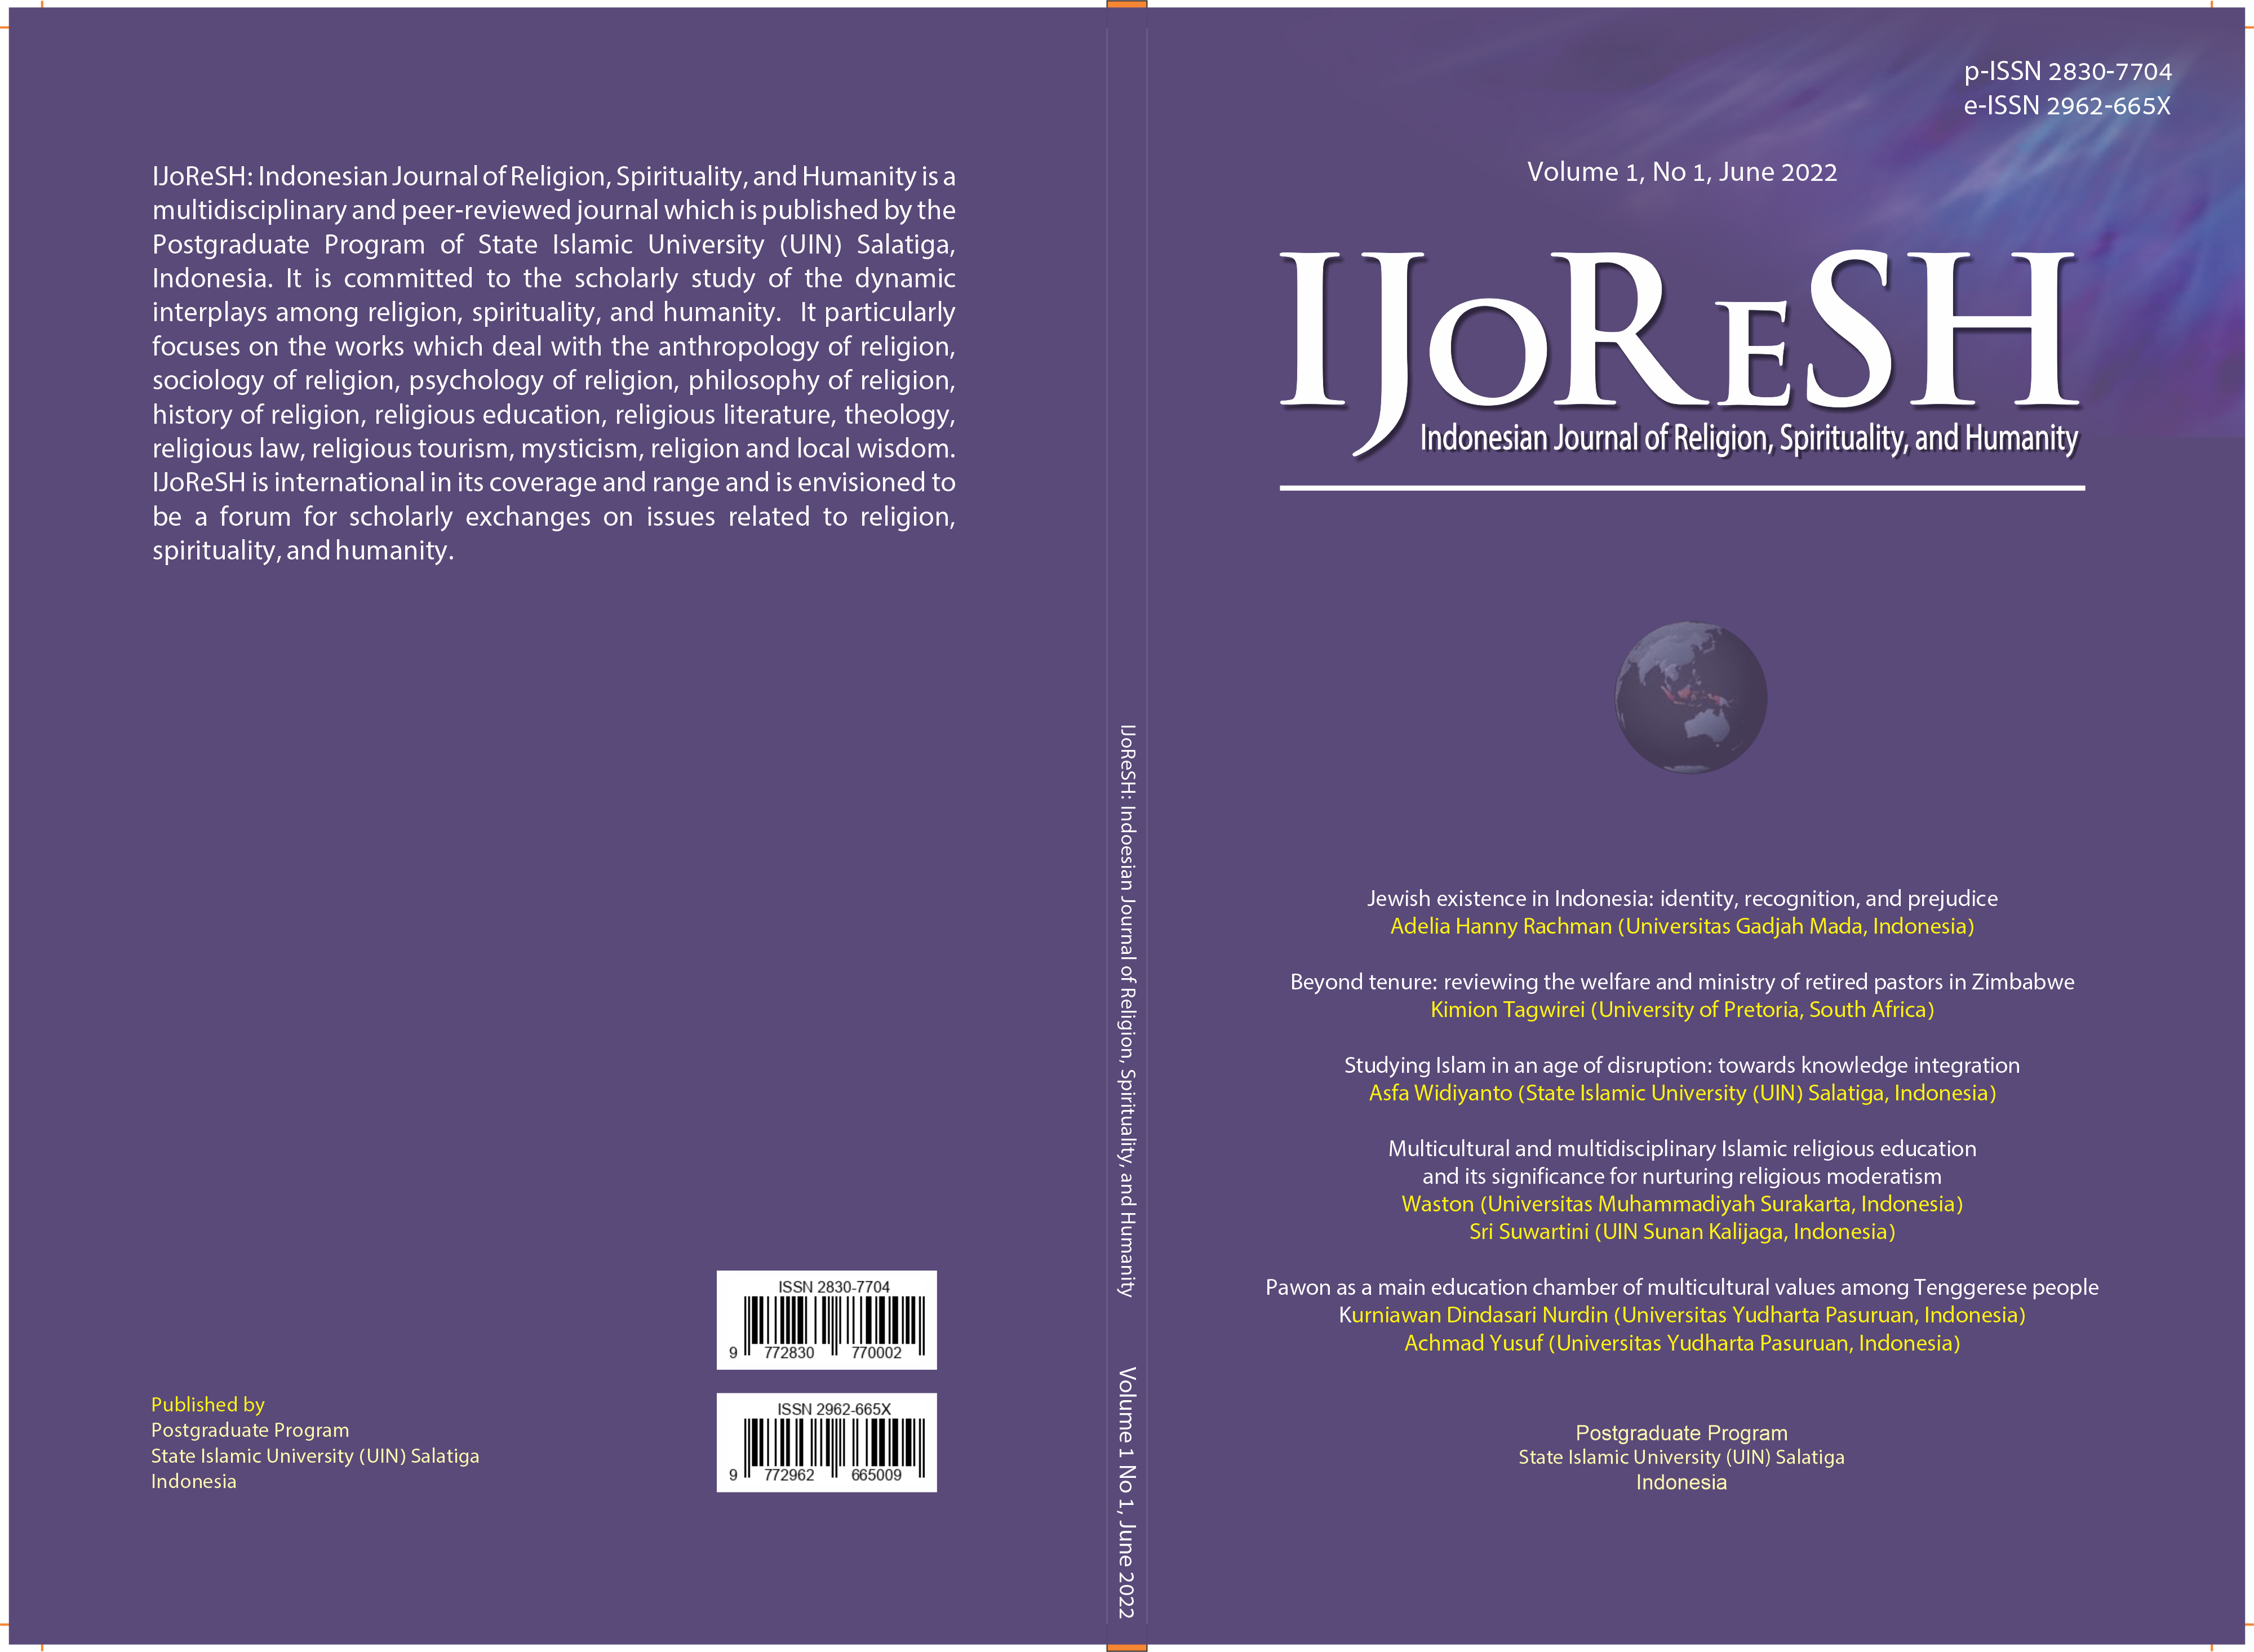 					Lihat Vol 1 No 1 (2022): Indonesian Journal of Religion, Spirituality, and Humanity
				